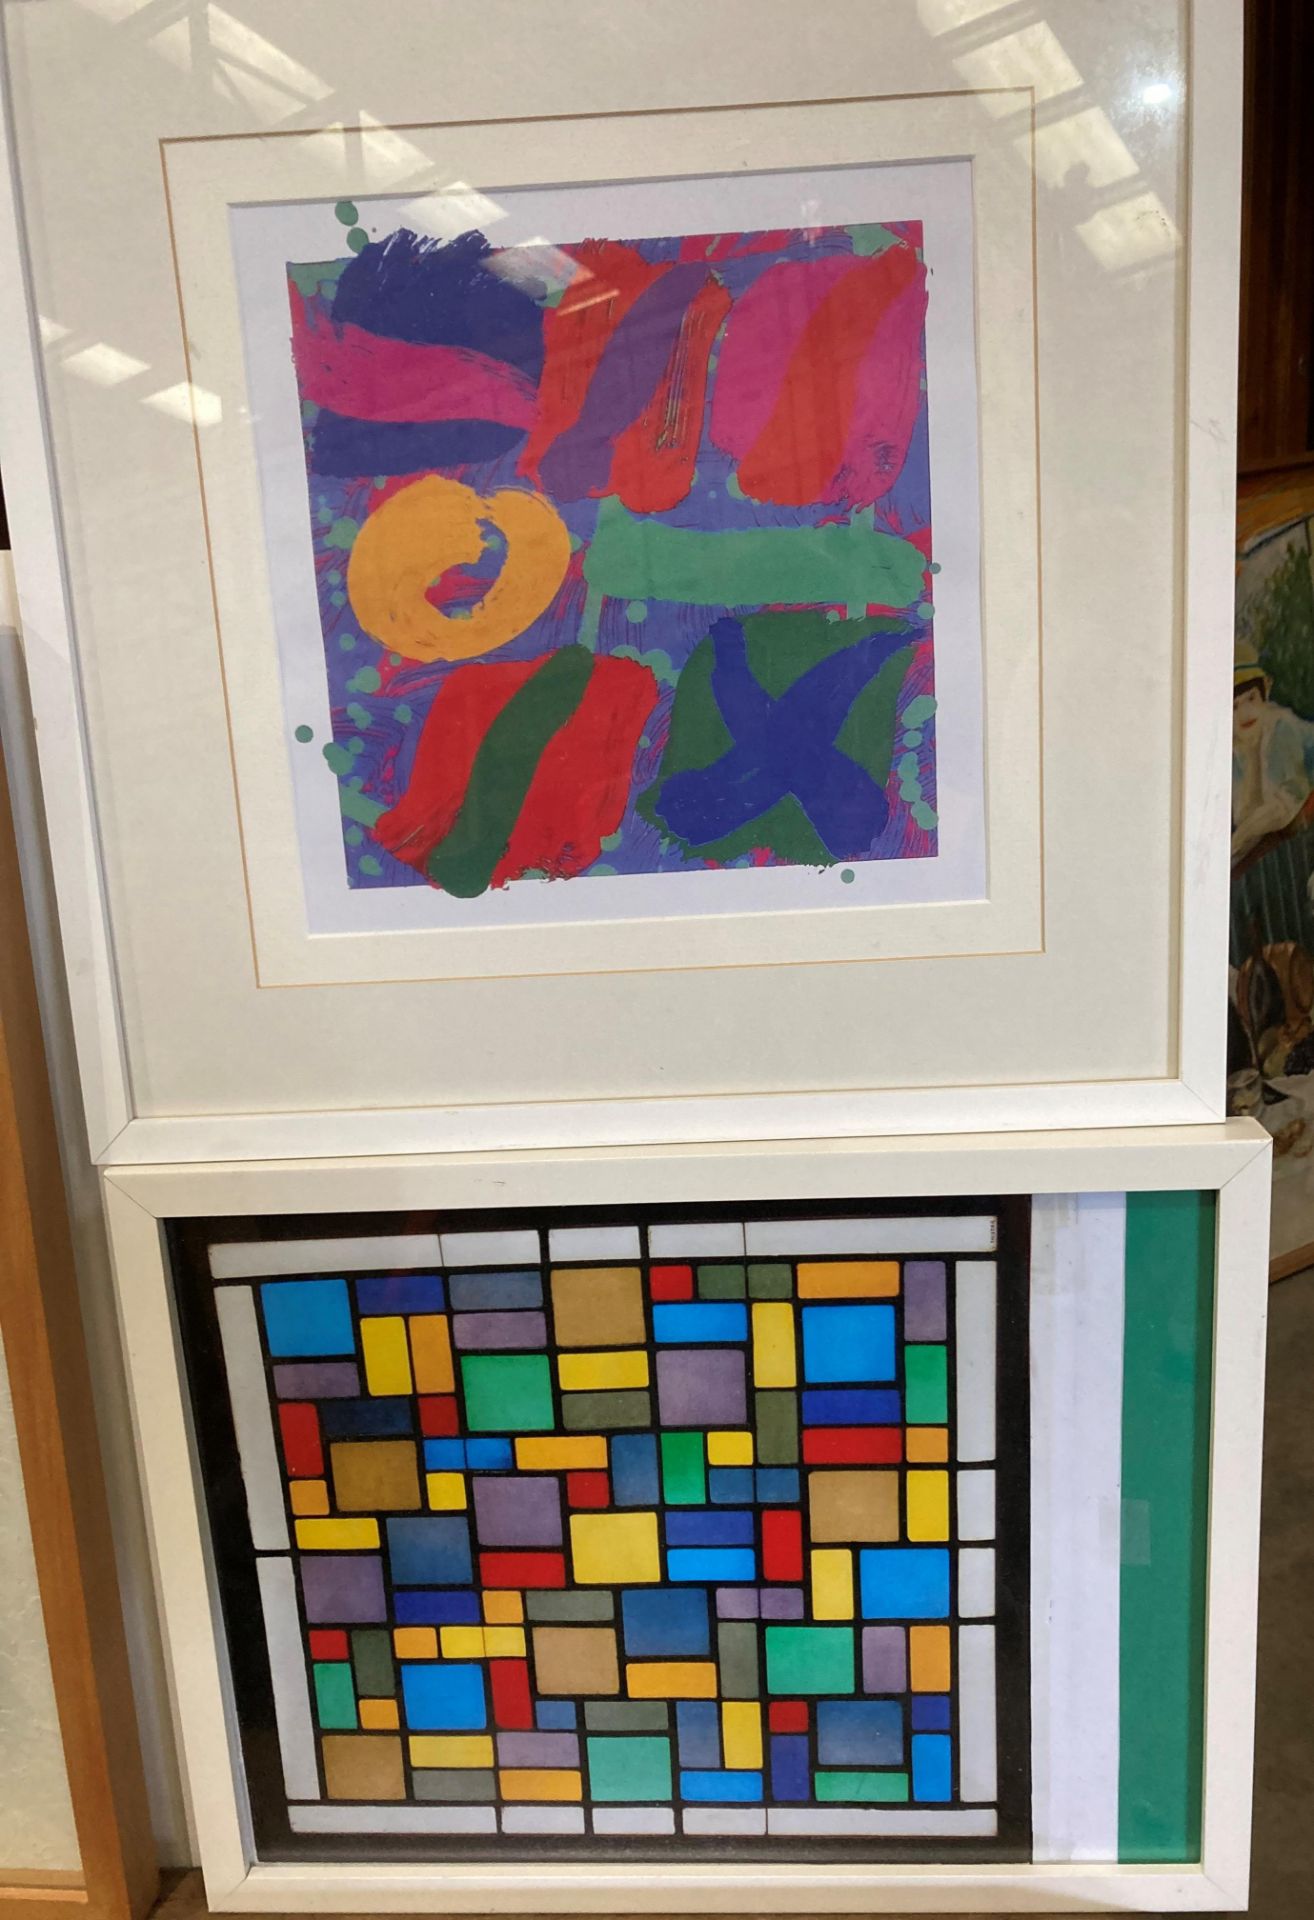 Five various abstract pictures - Stanton Macdonald-Wright, - Image 3 of 4